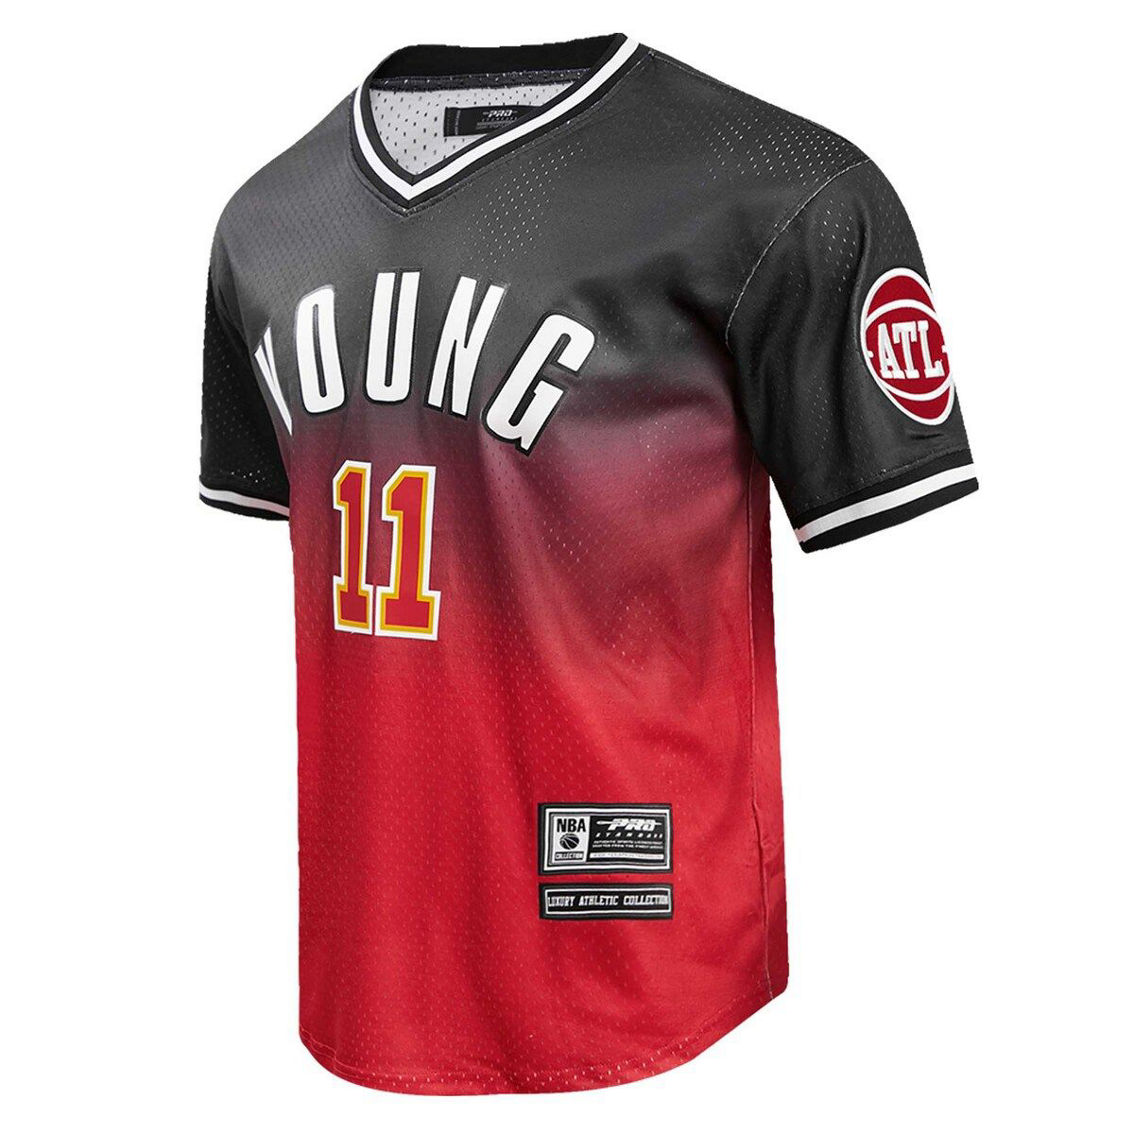 Pro Standard Men's Trae Young Black/Red Atlanta Hawks Ombre Name & Number T-Shirt - Image 3 of 4